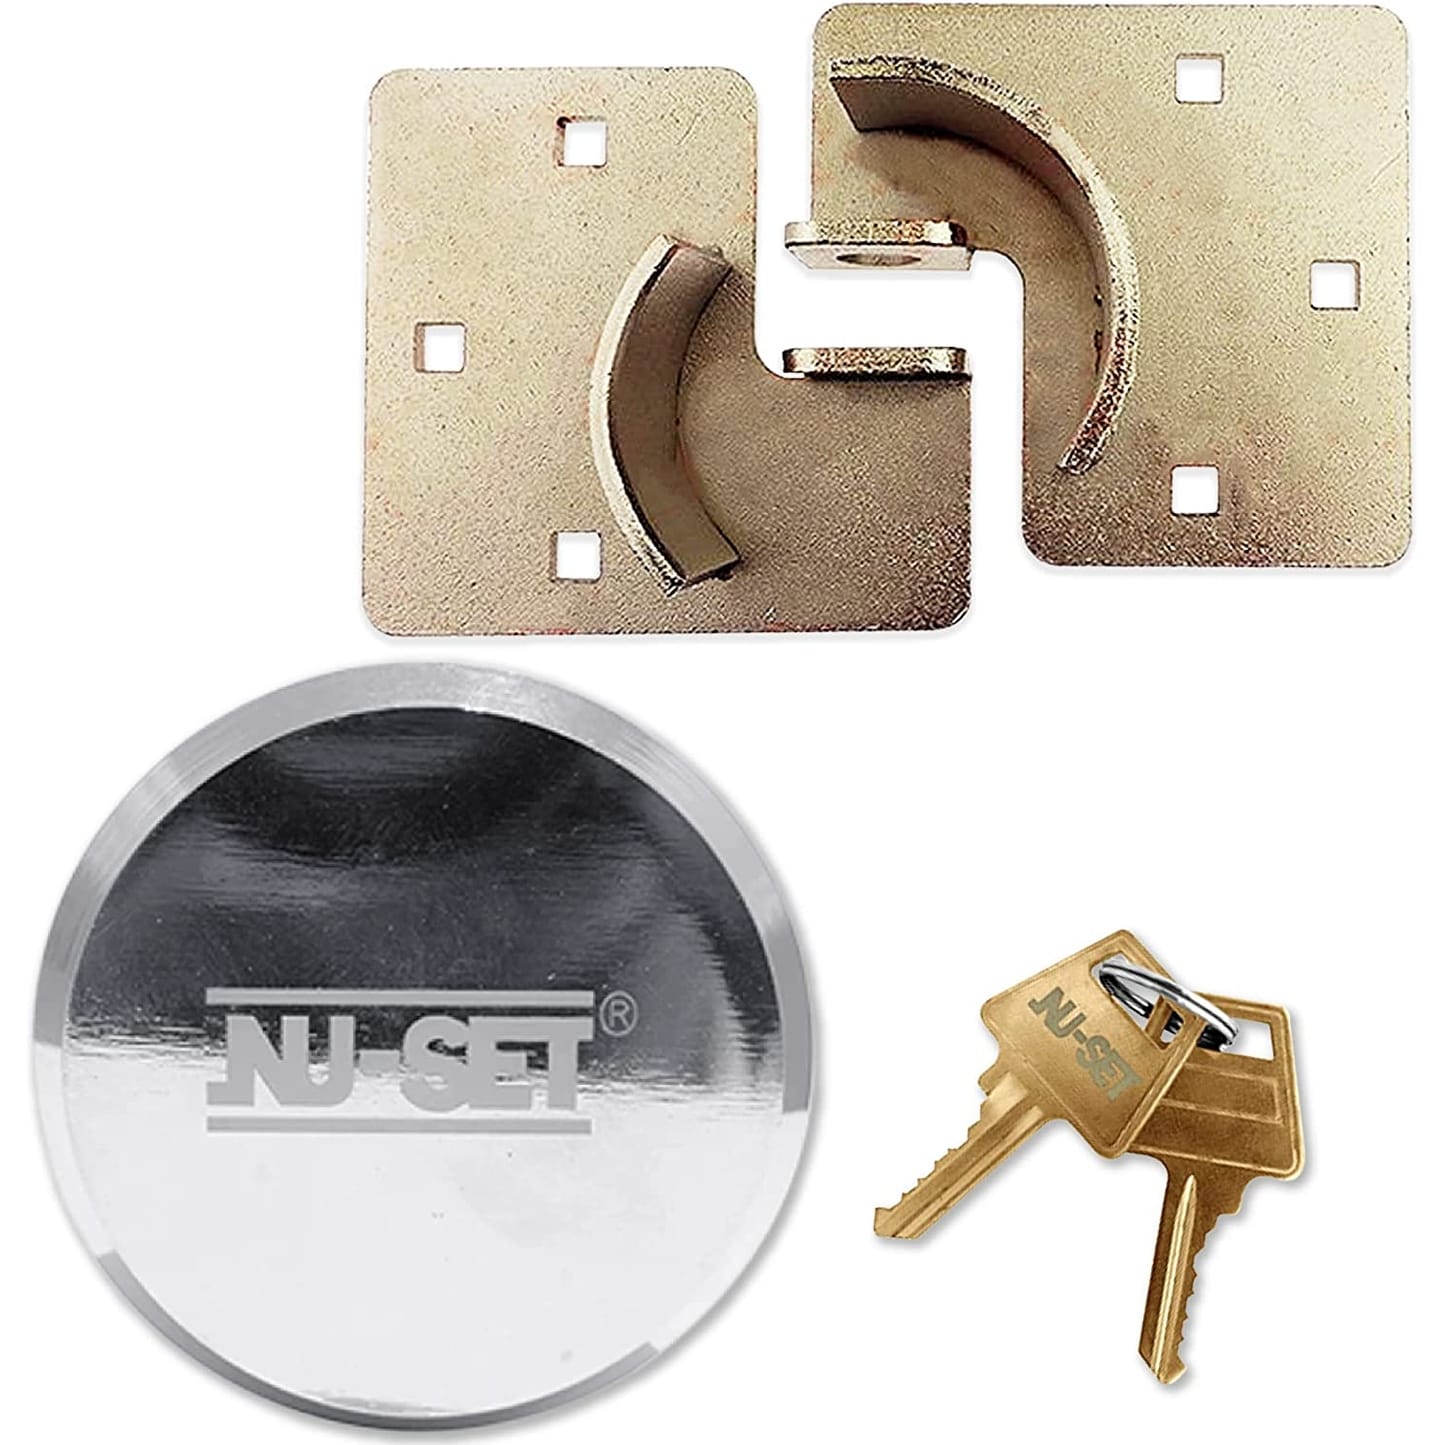 https://ak1.ostkcdn.com/images/products/is/images/direct/d85907f3b219841dd4269a9be63e975bc5a97e09/NUSET-Hockey-Puck-Padlock-Solid-Steel-and-High-Security-Hasp-for-Trailer.jpg